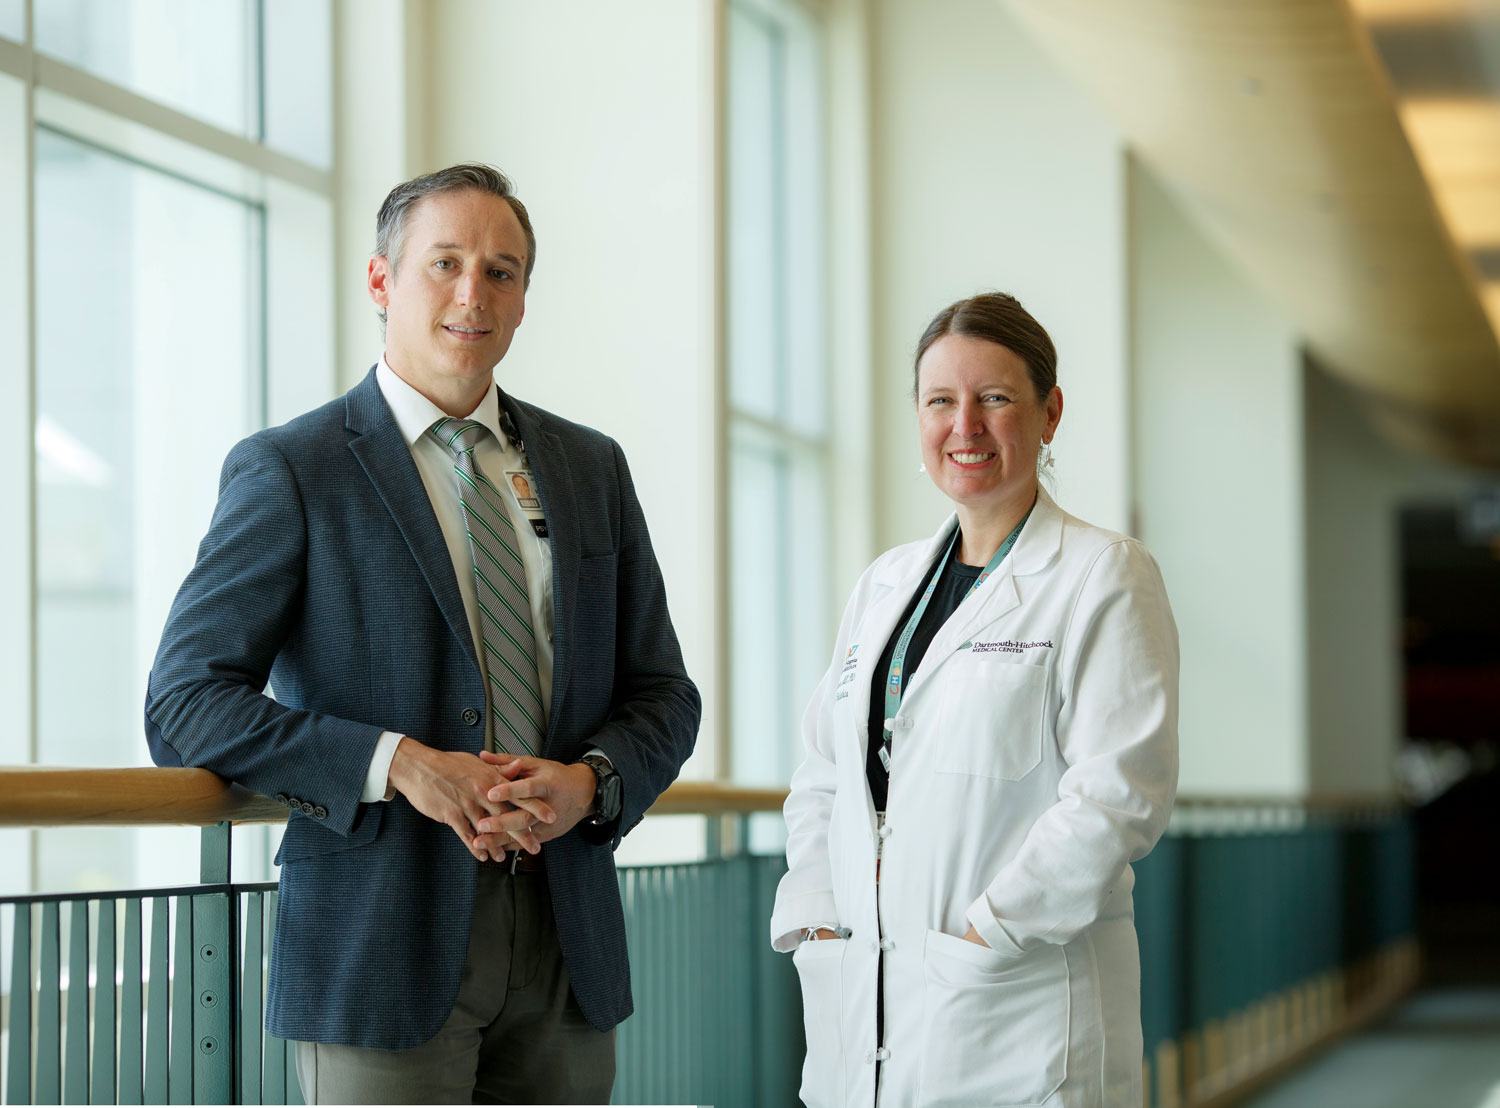 From left to right: Robert Brady, PhD, and JoAnna Leyenaar, MD, MPH, PhD, co-leaders of the I*CARE project.